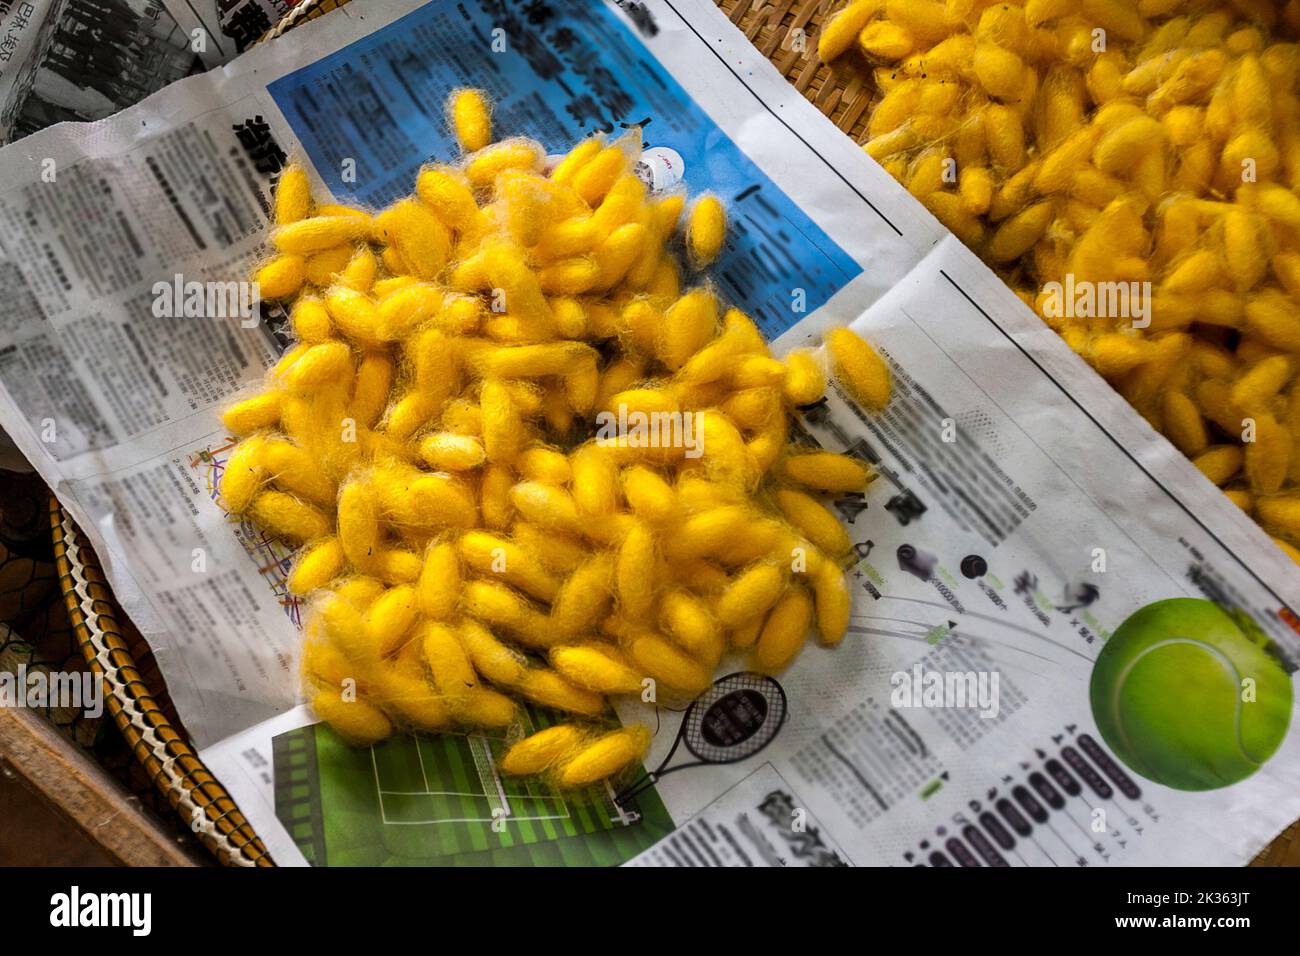 A pile of silk cacoons in a newspaper. (news print is blurred out) Stock Photo